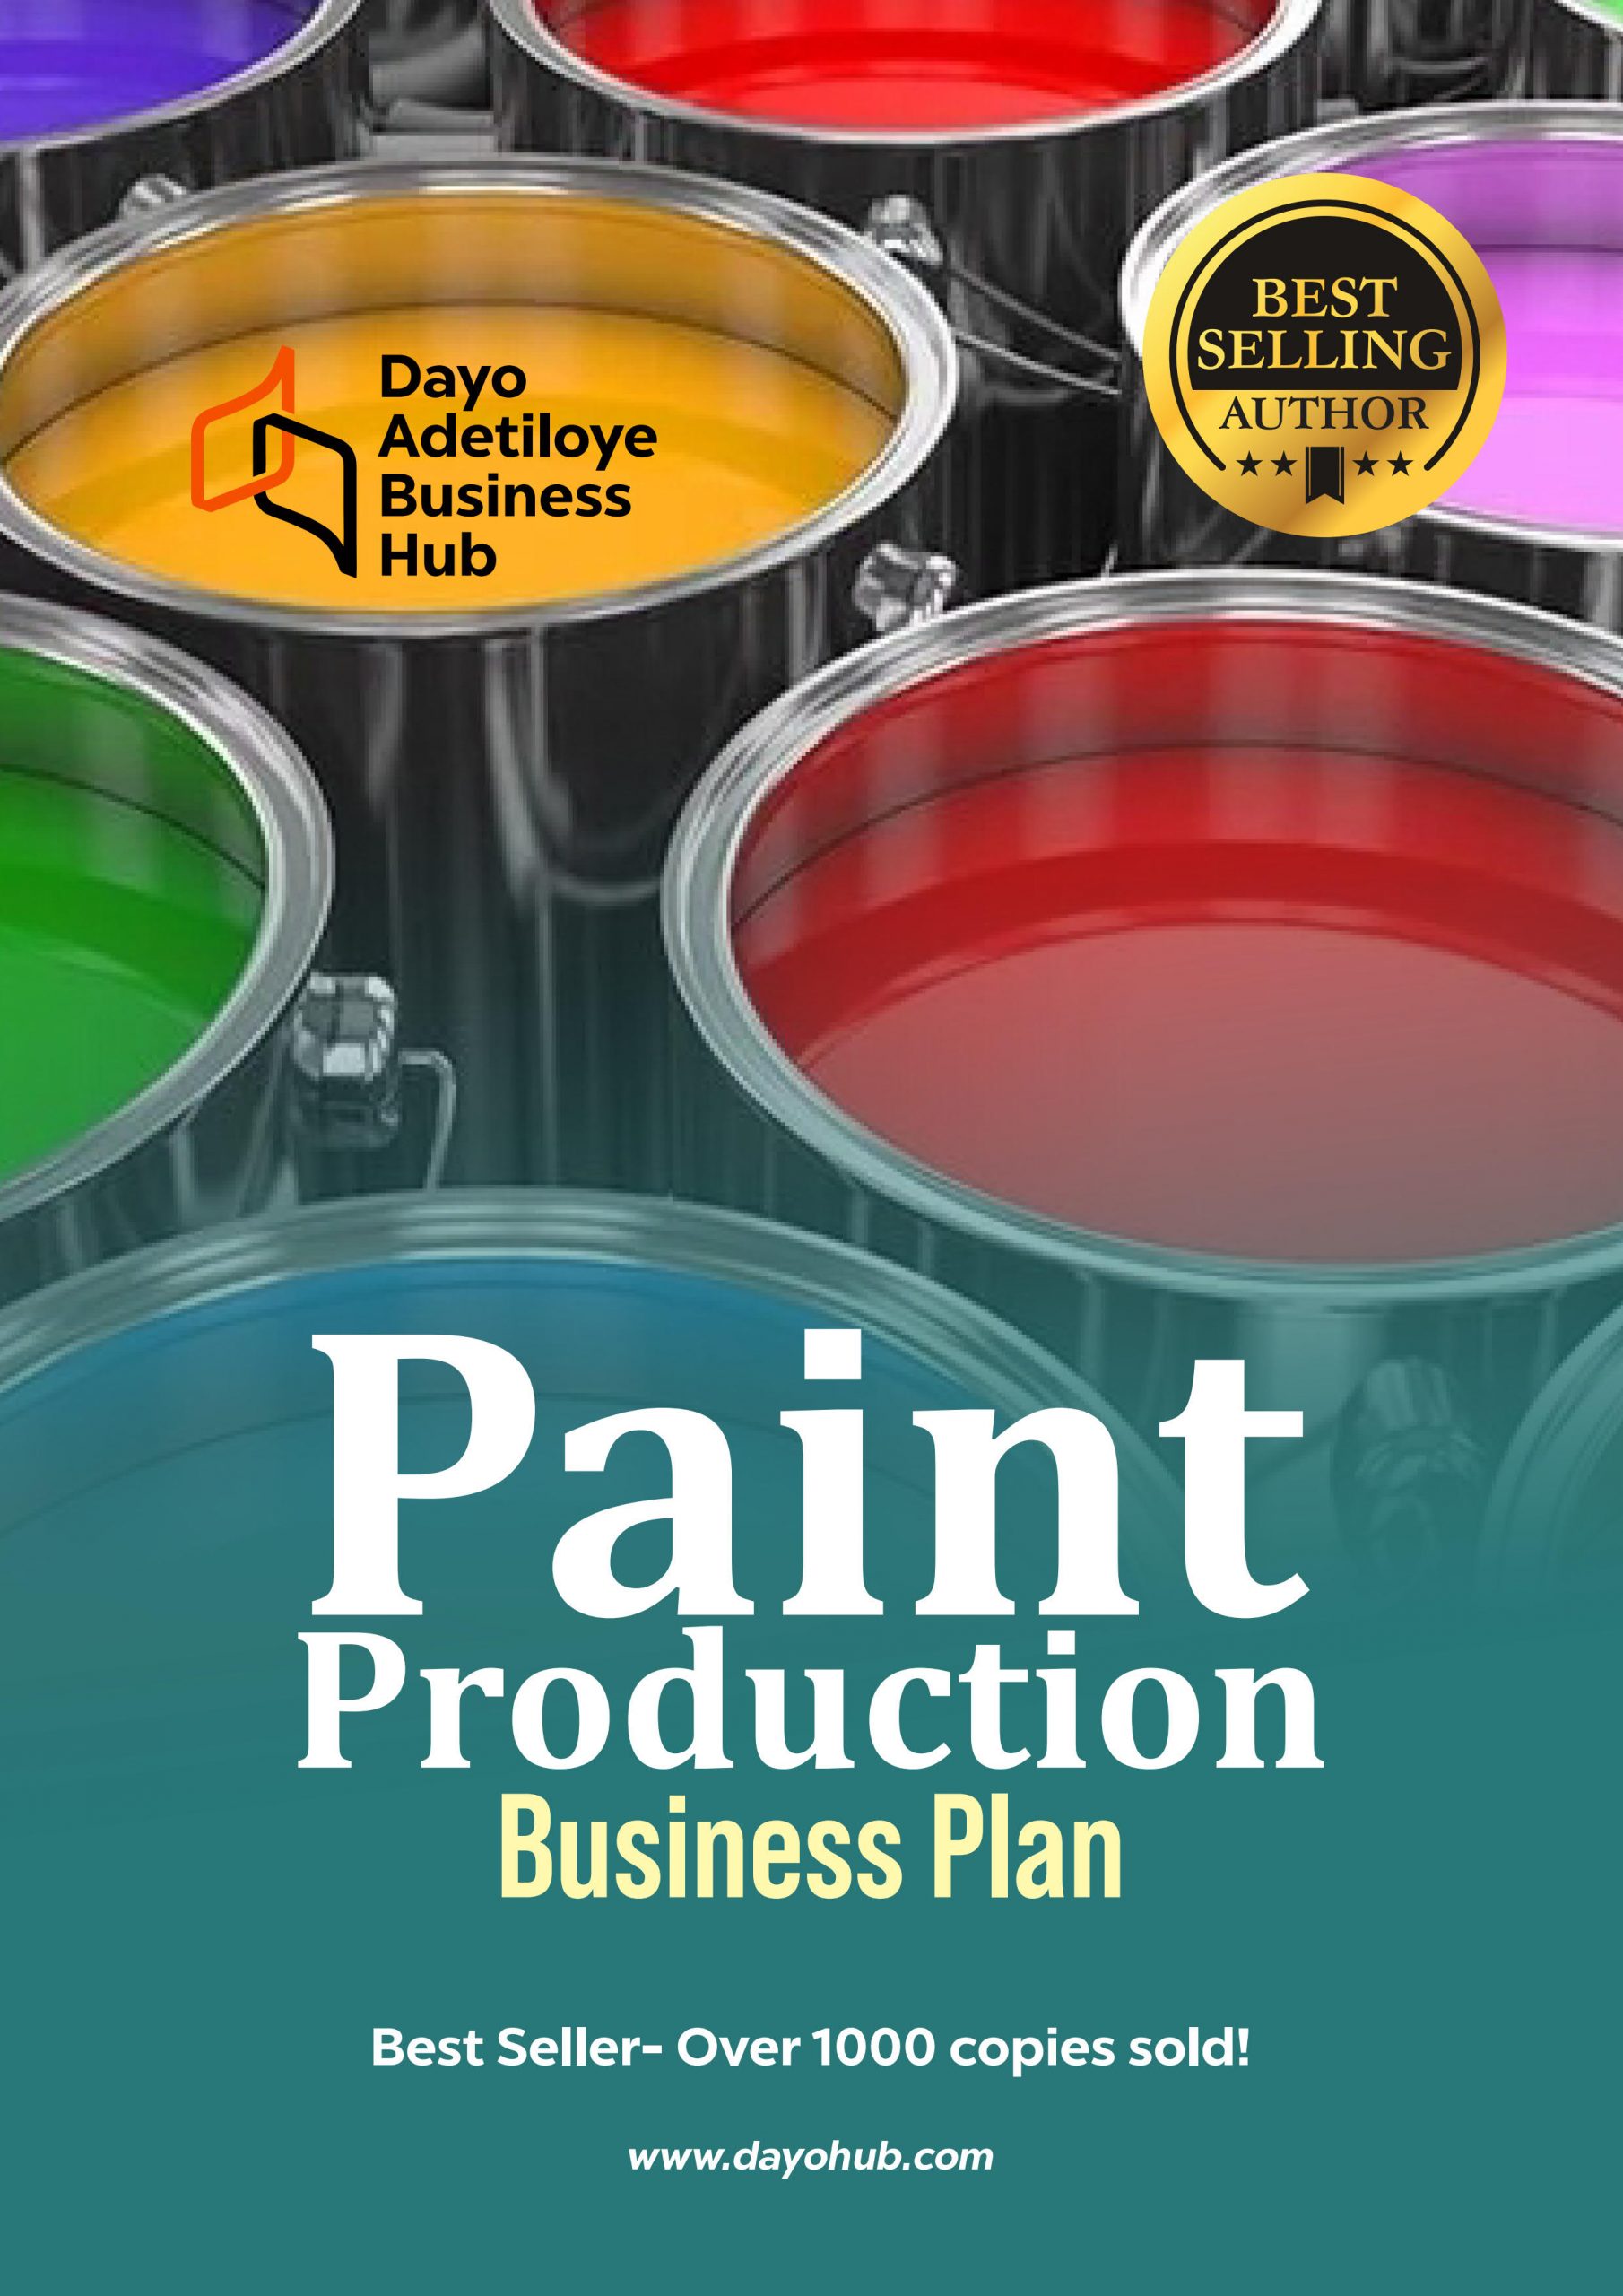 business plan on paint production